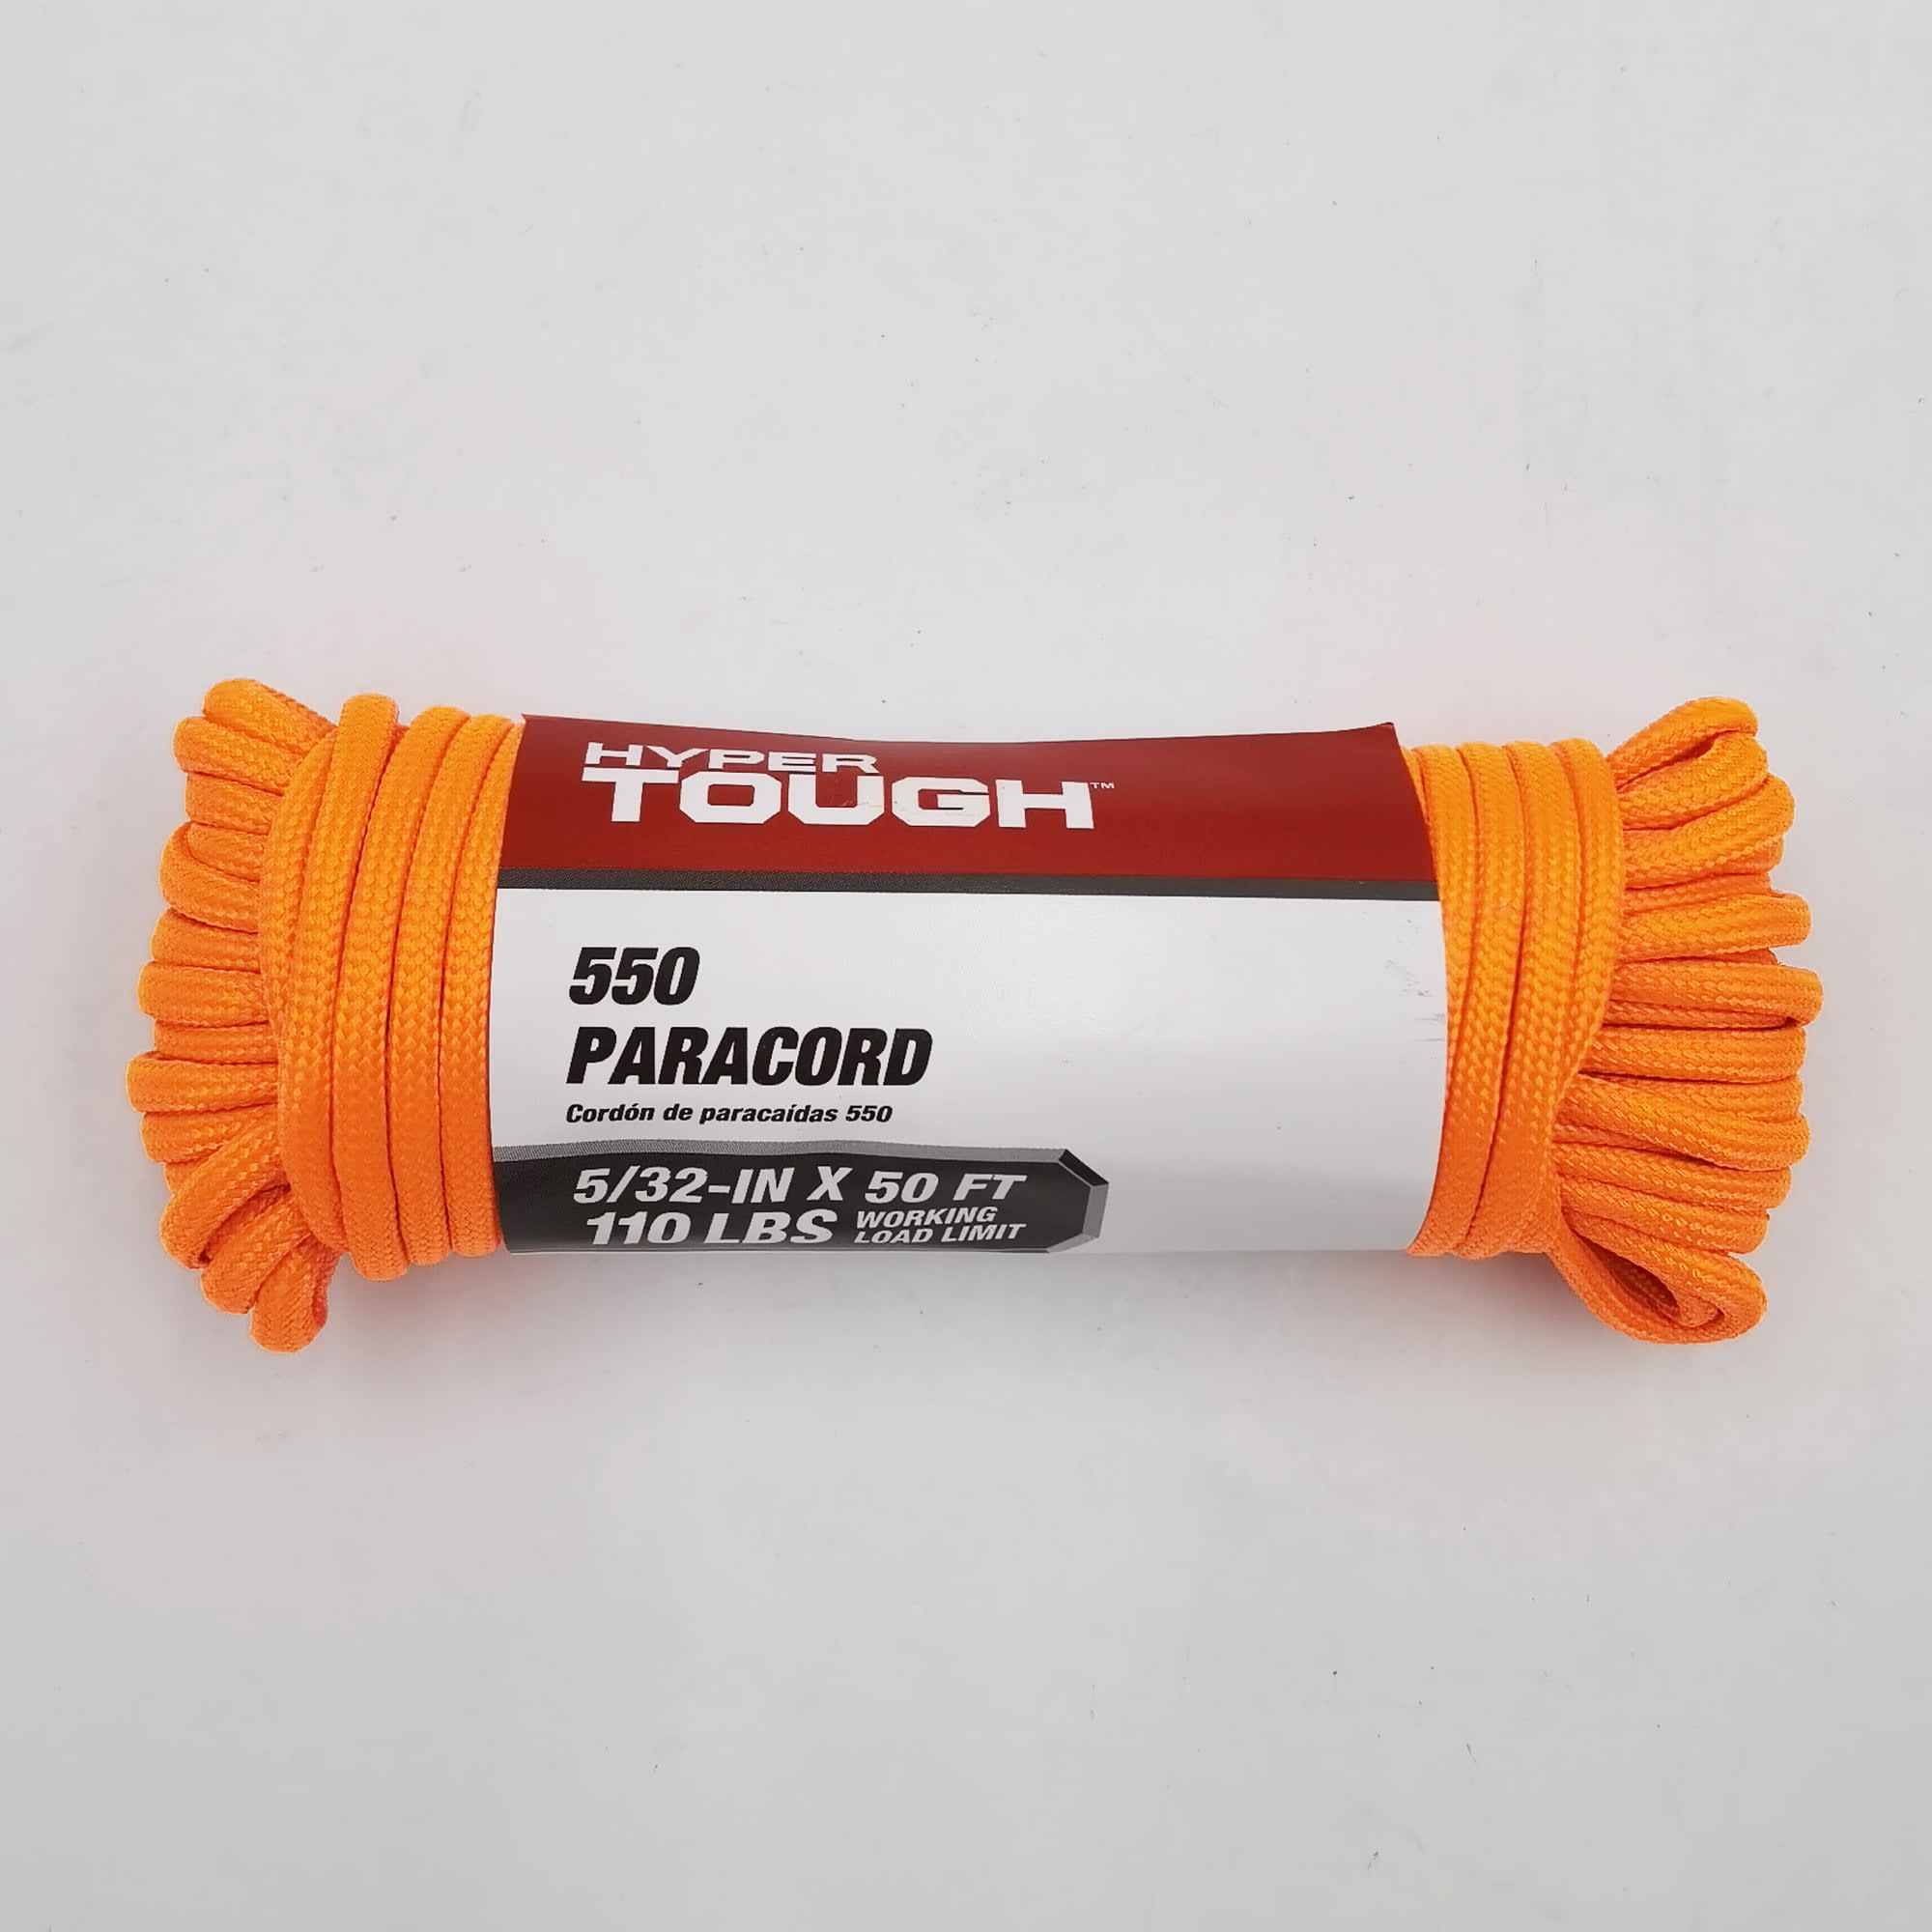 Hyper Tough 550 Utility Paracord Rope, Orange, 5/32 inch x 50 feet -  DroneUp Delivery